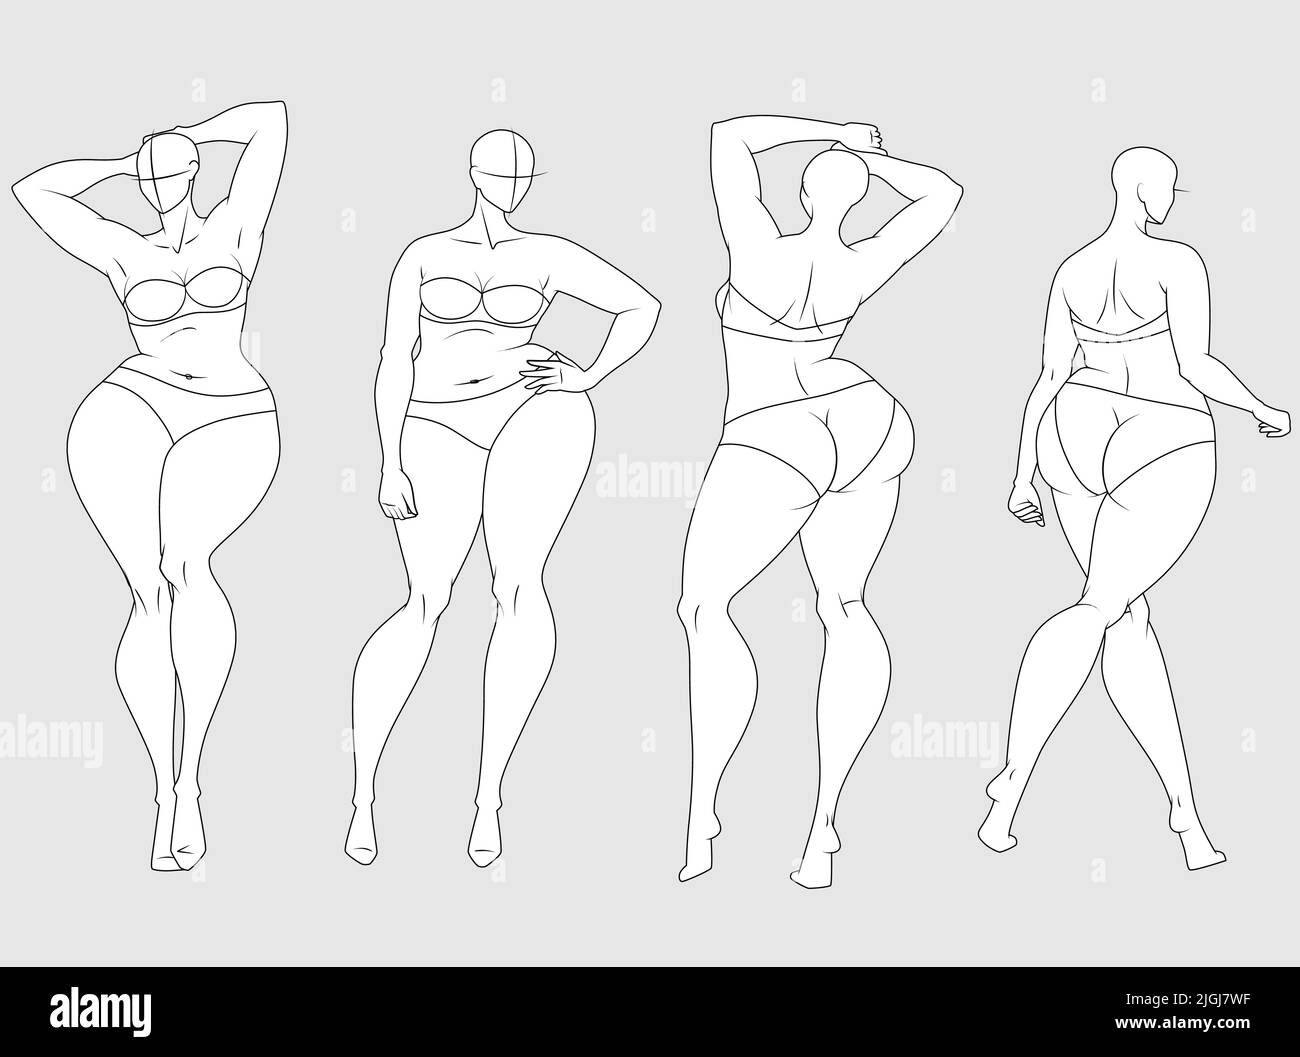 Plus Size Fashion Figure Templates. Exaggerated Croquis for Fashion Design and Illustration Stock Vector